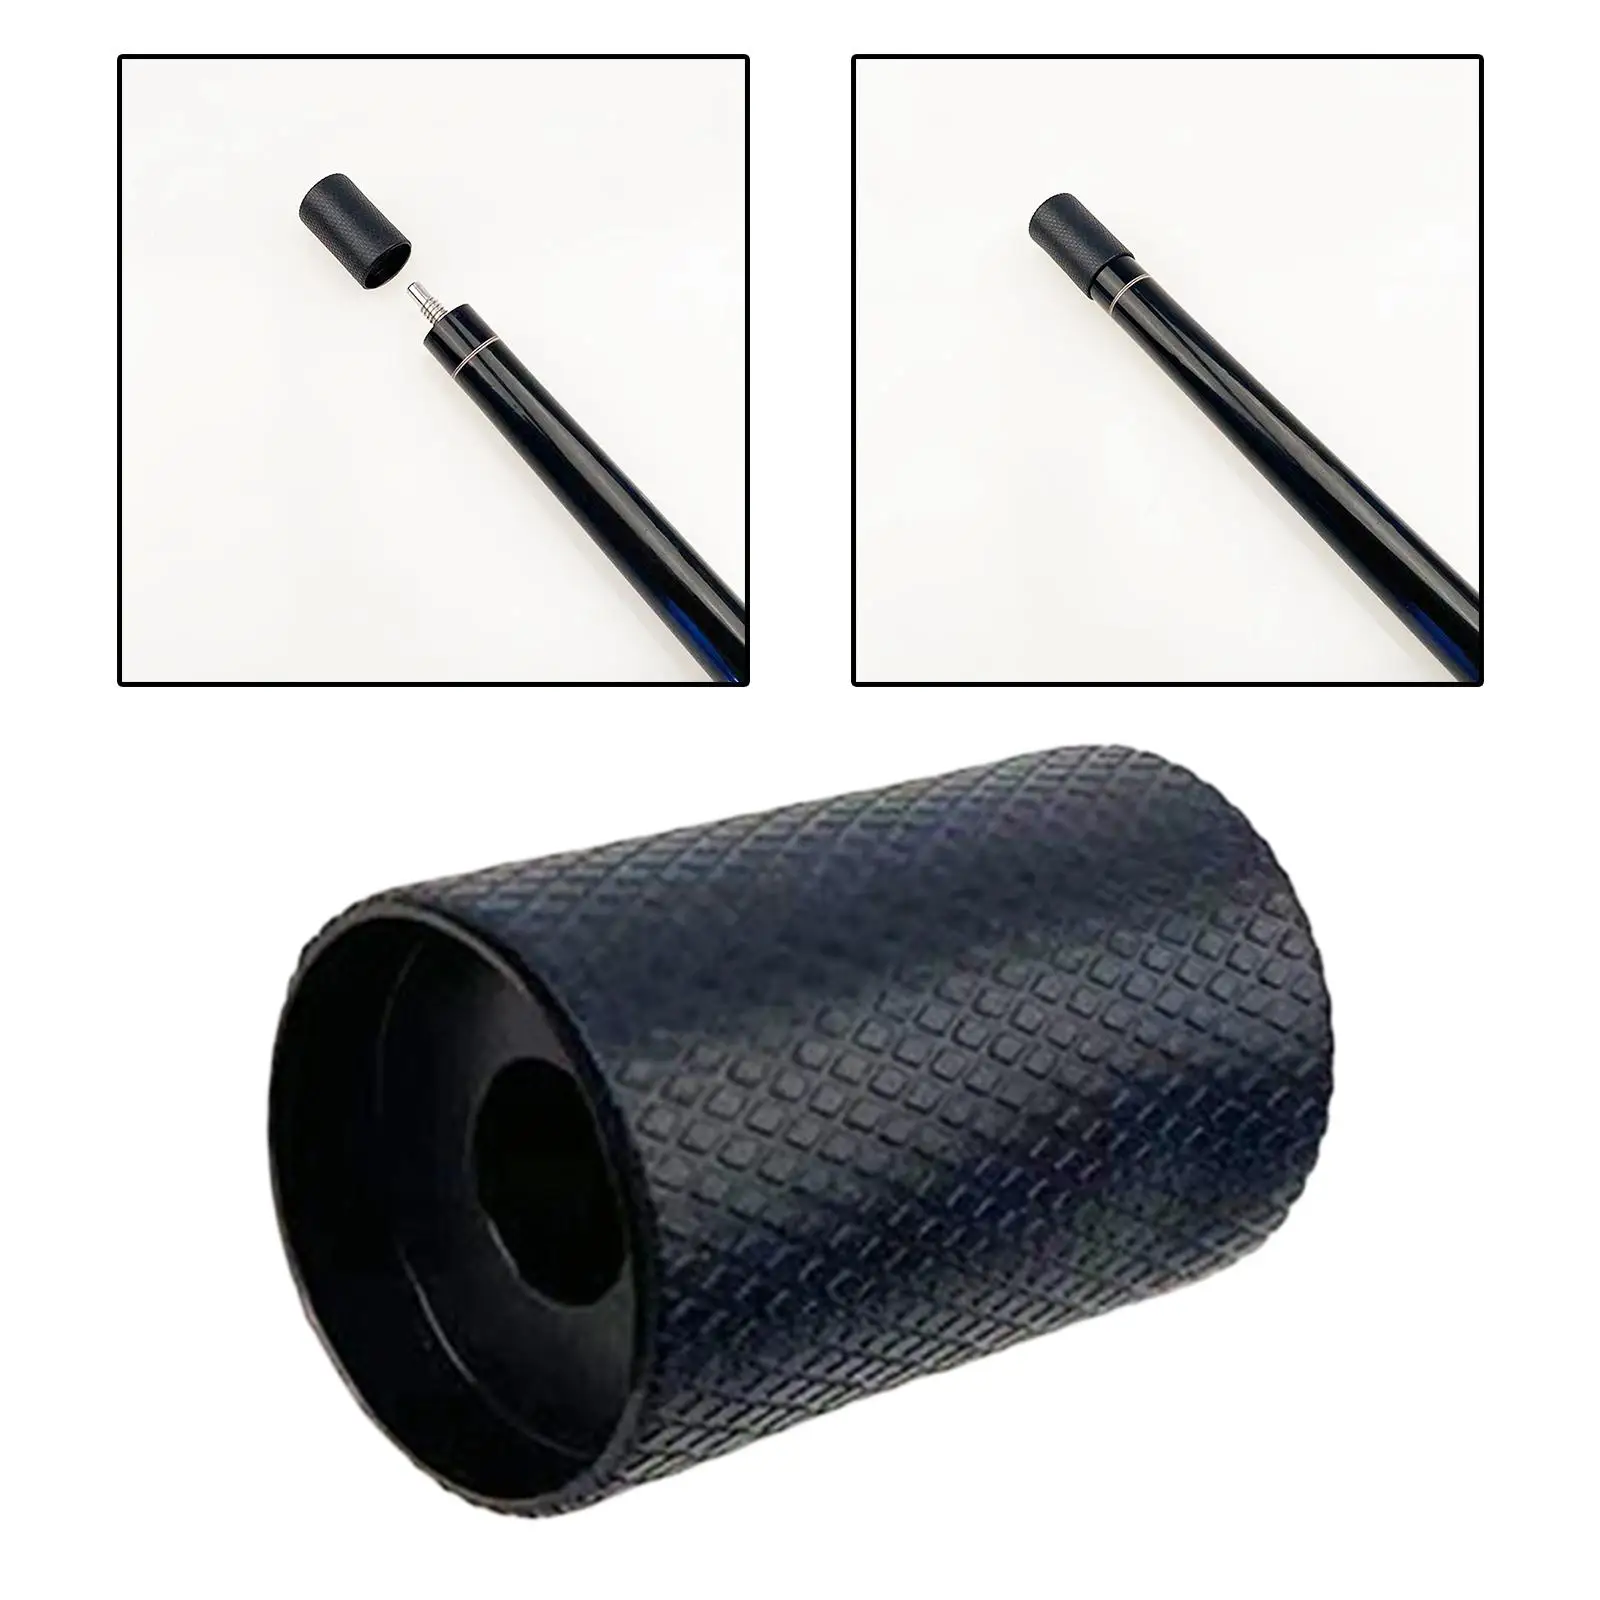 Joint Protector for Pool Cues Billiards Tip Tools Snooker Billiards Supplies